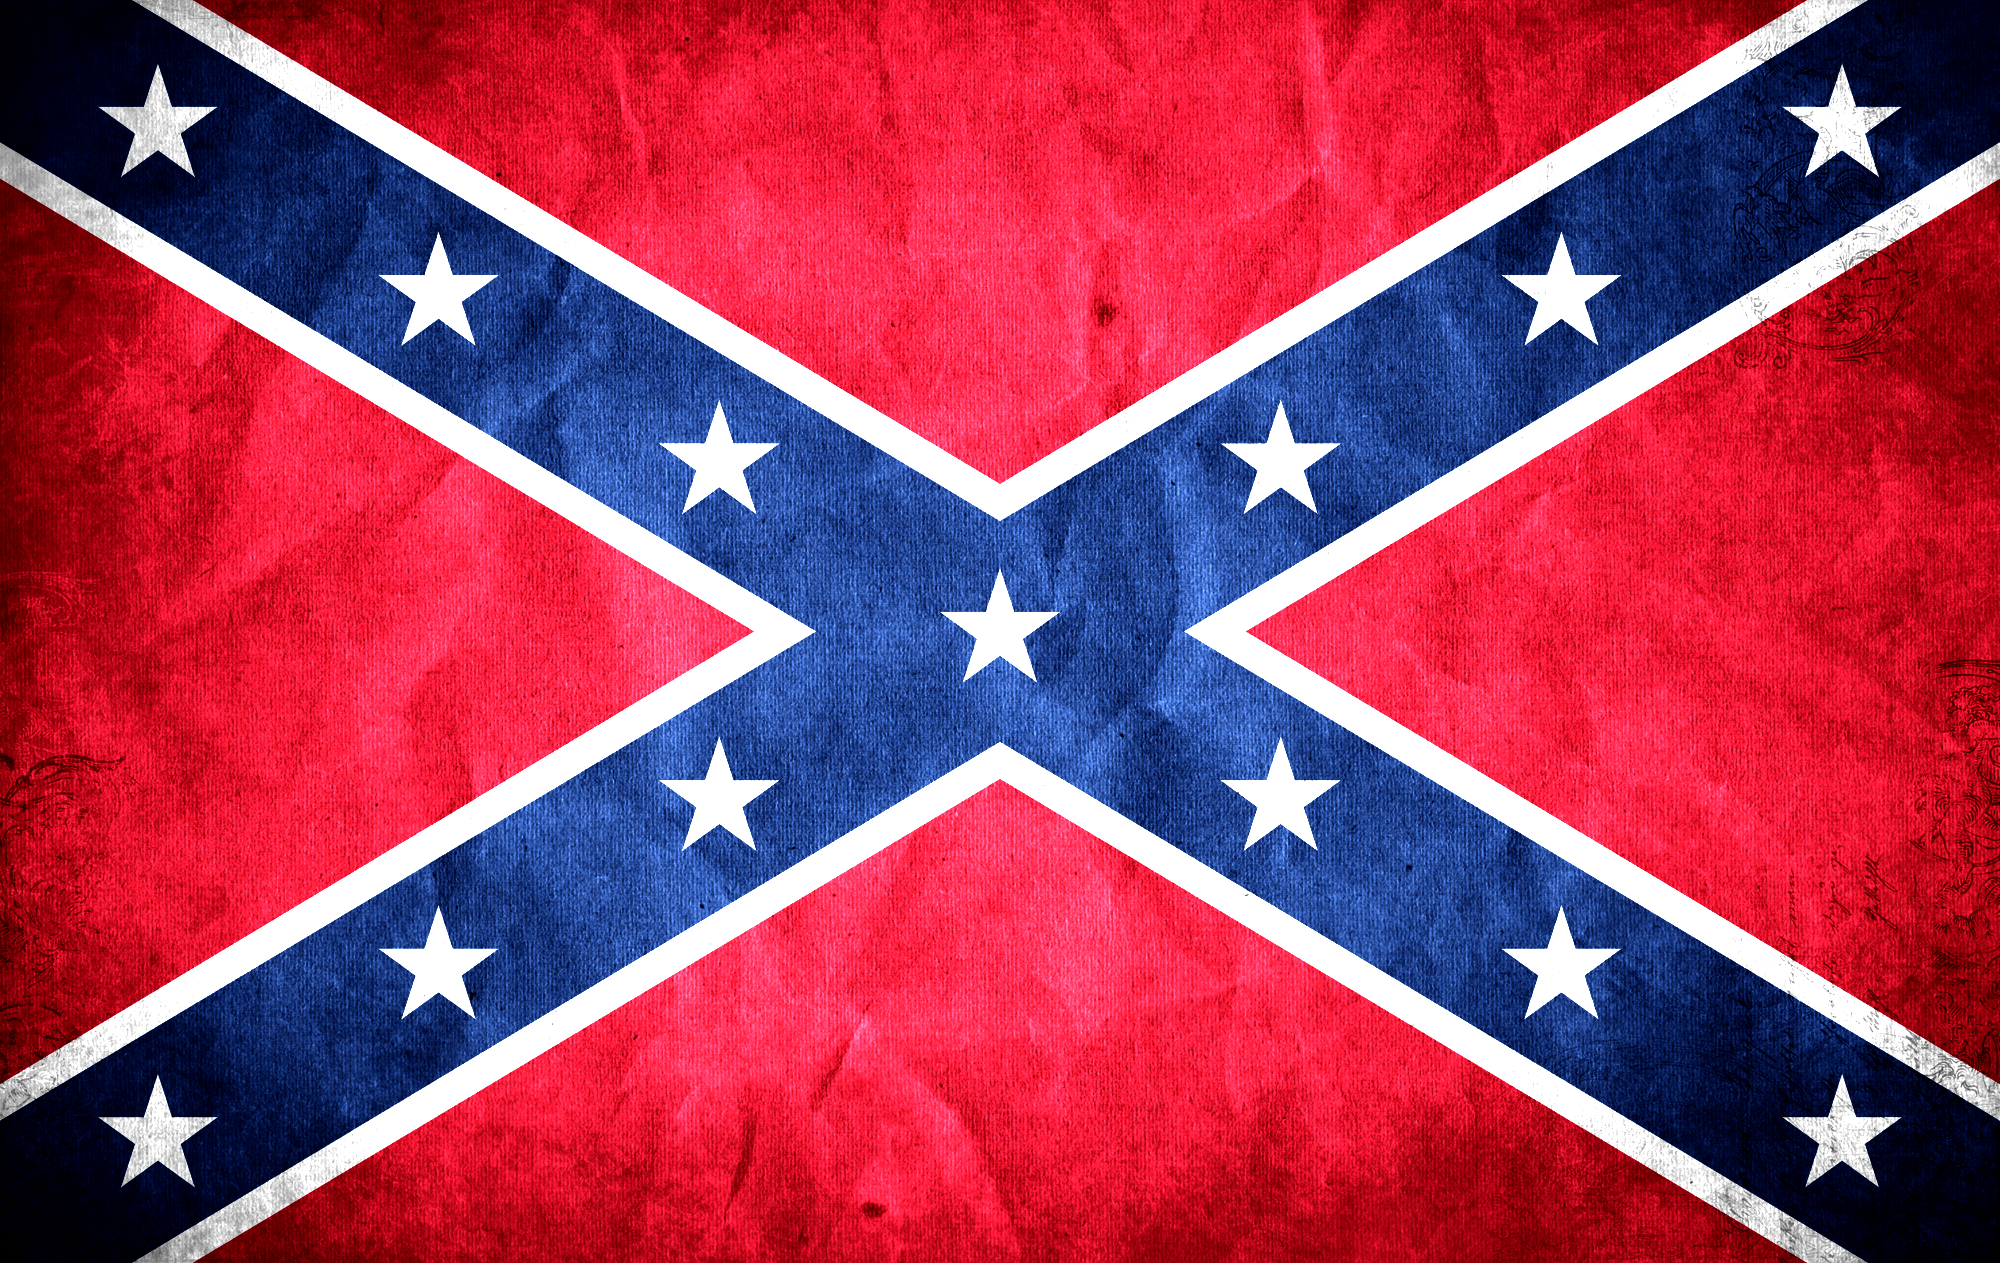 2000pxConfederate Rebel Flag By IronKnight by IronKnight0081